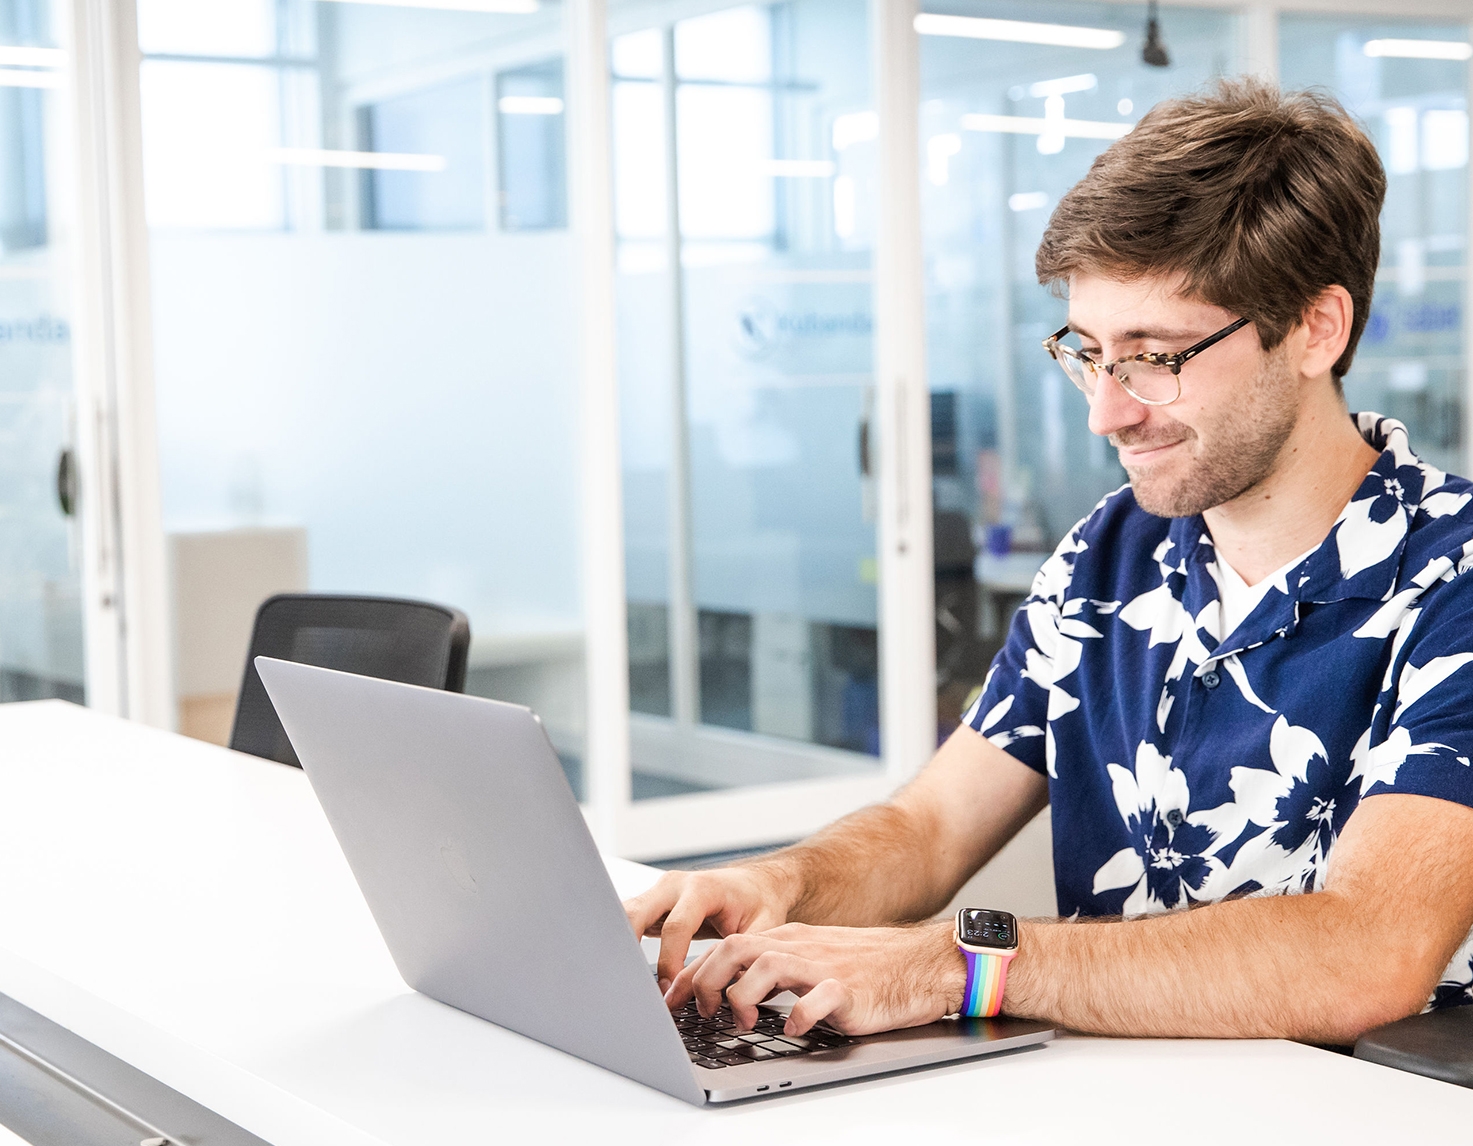 Man with short brown hair, wearing a blue floral pattern shirt works on a laptop in a bright office